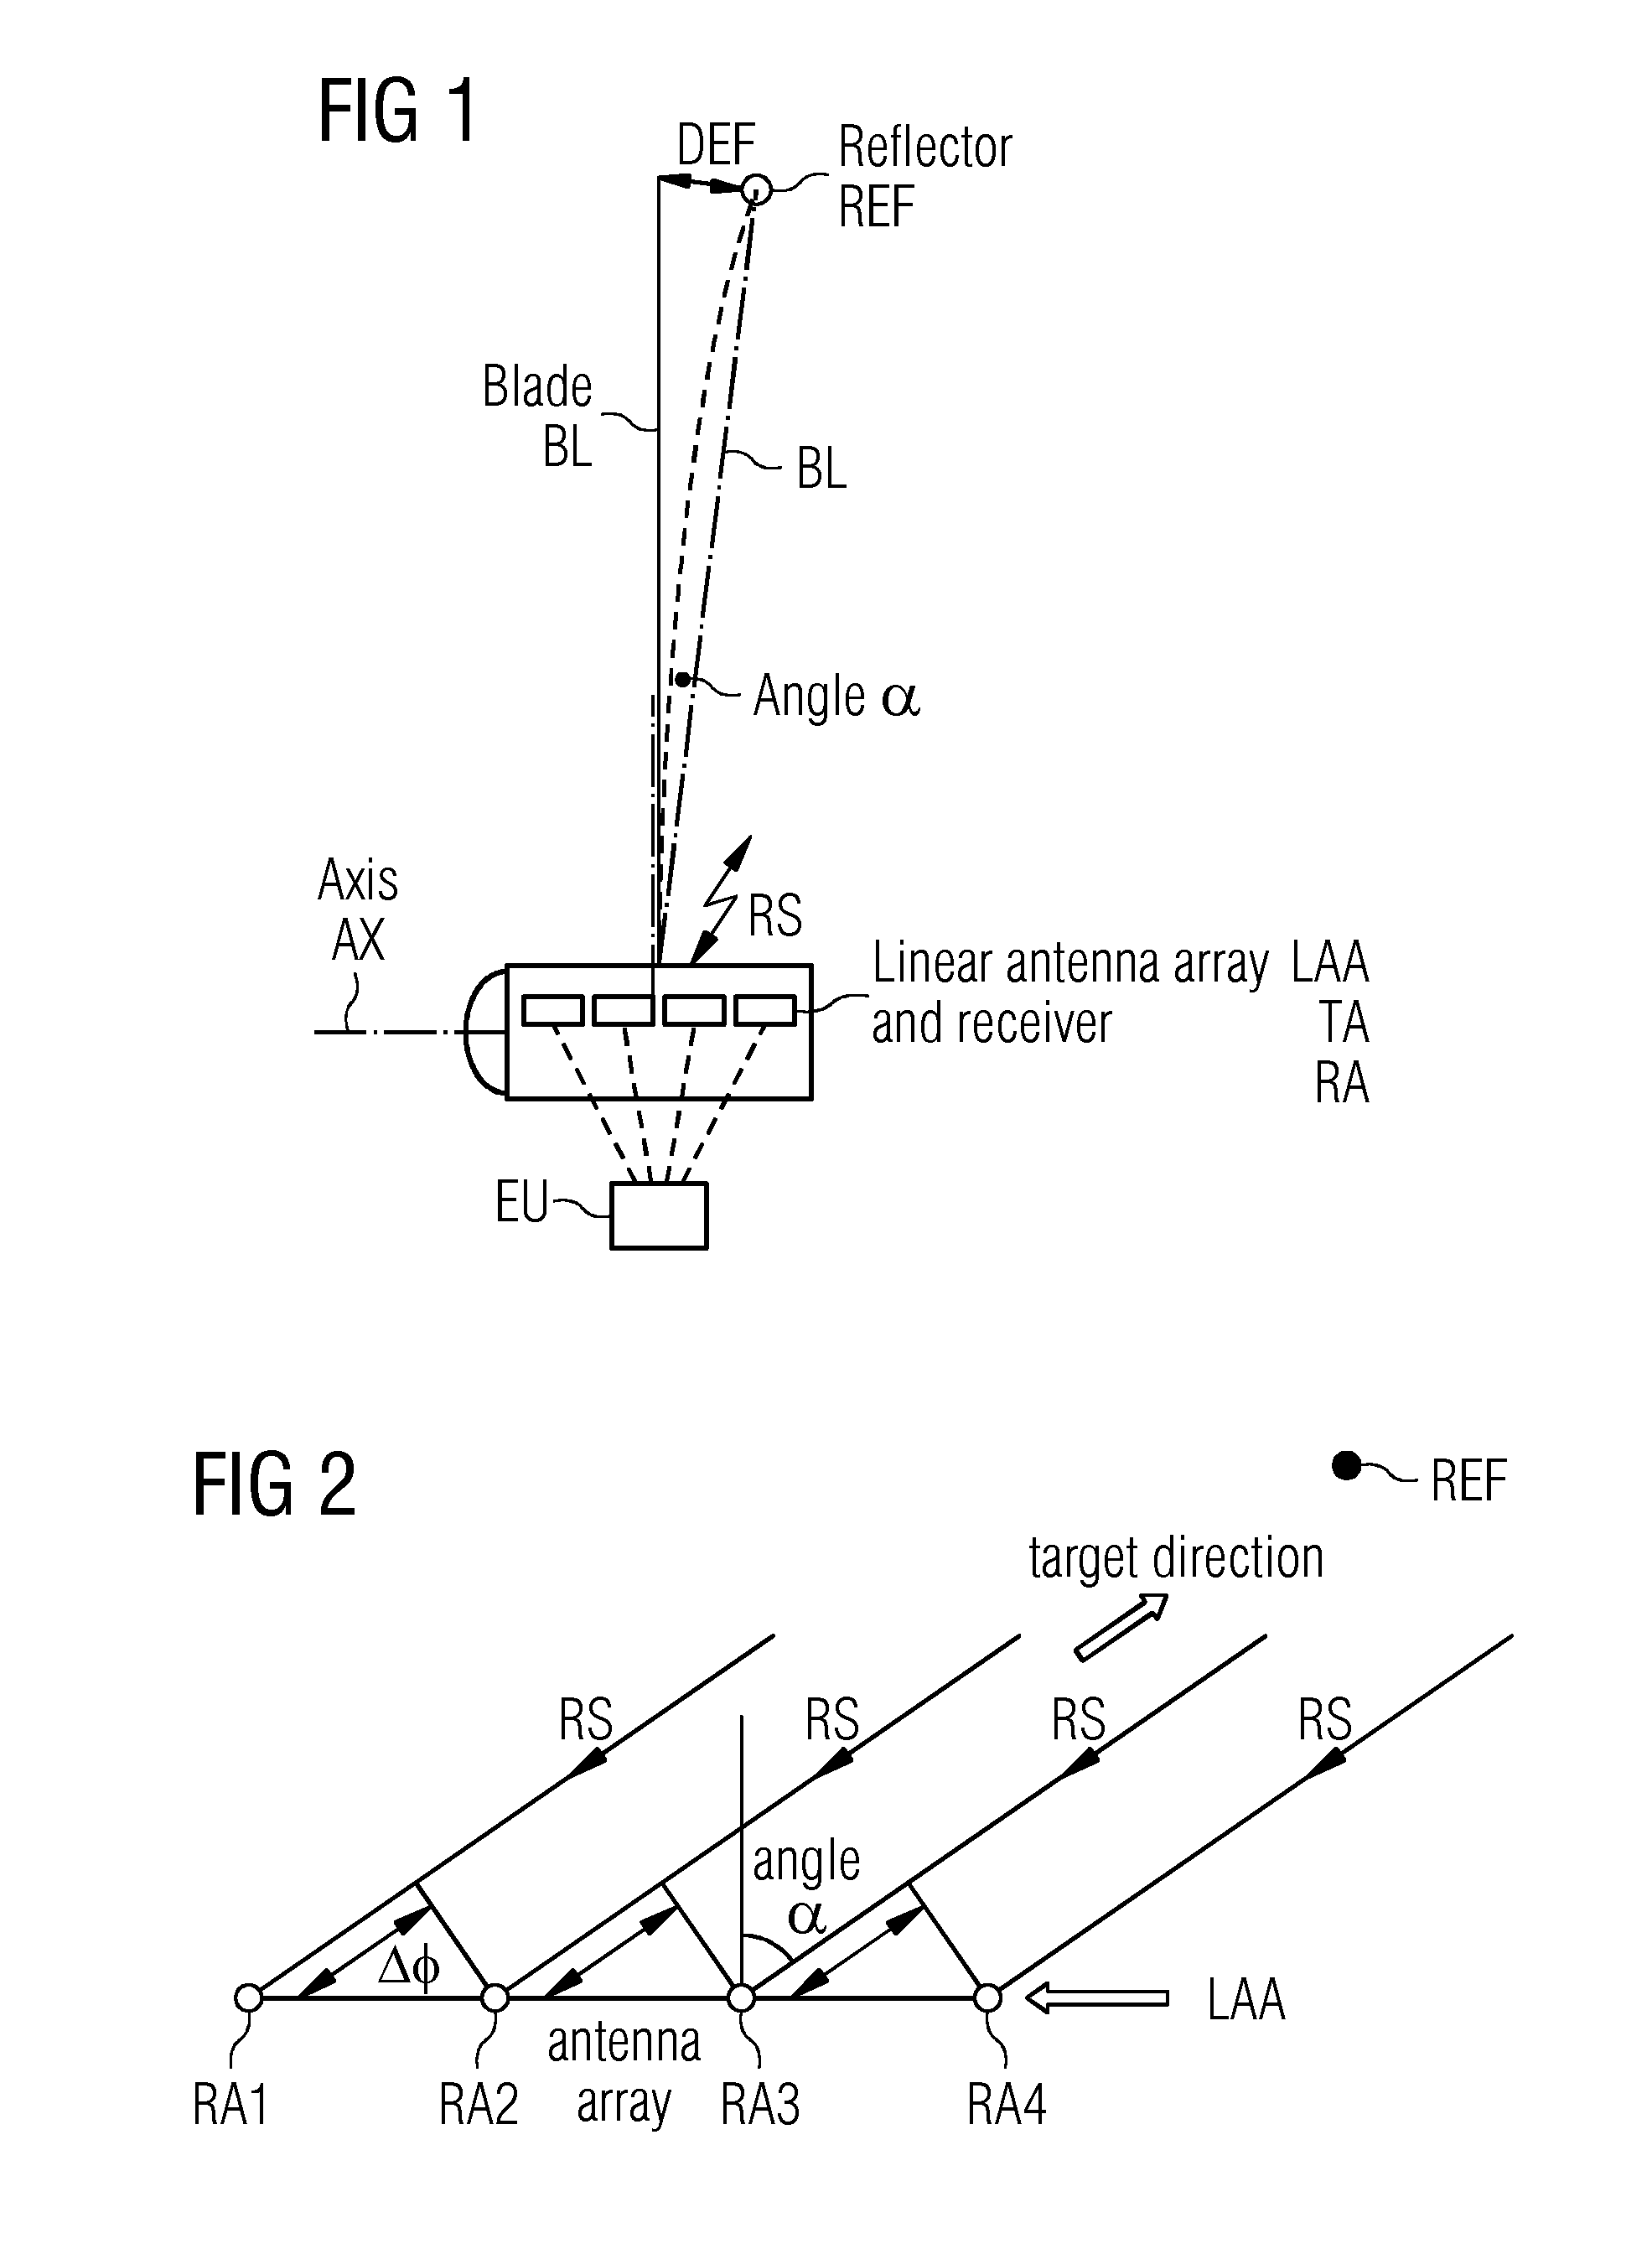 Arrangement to measure the deflection of an object